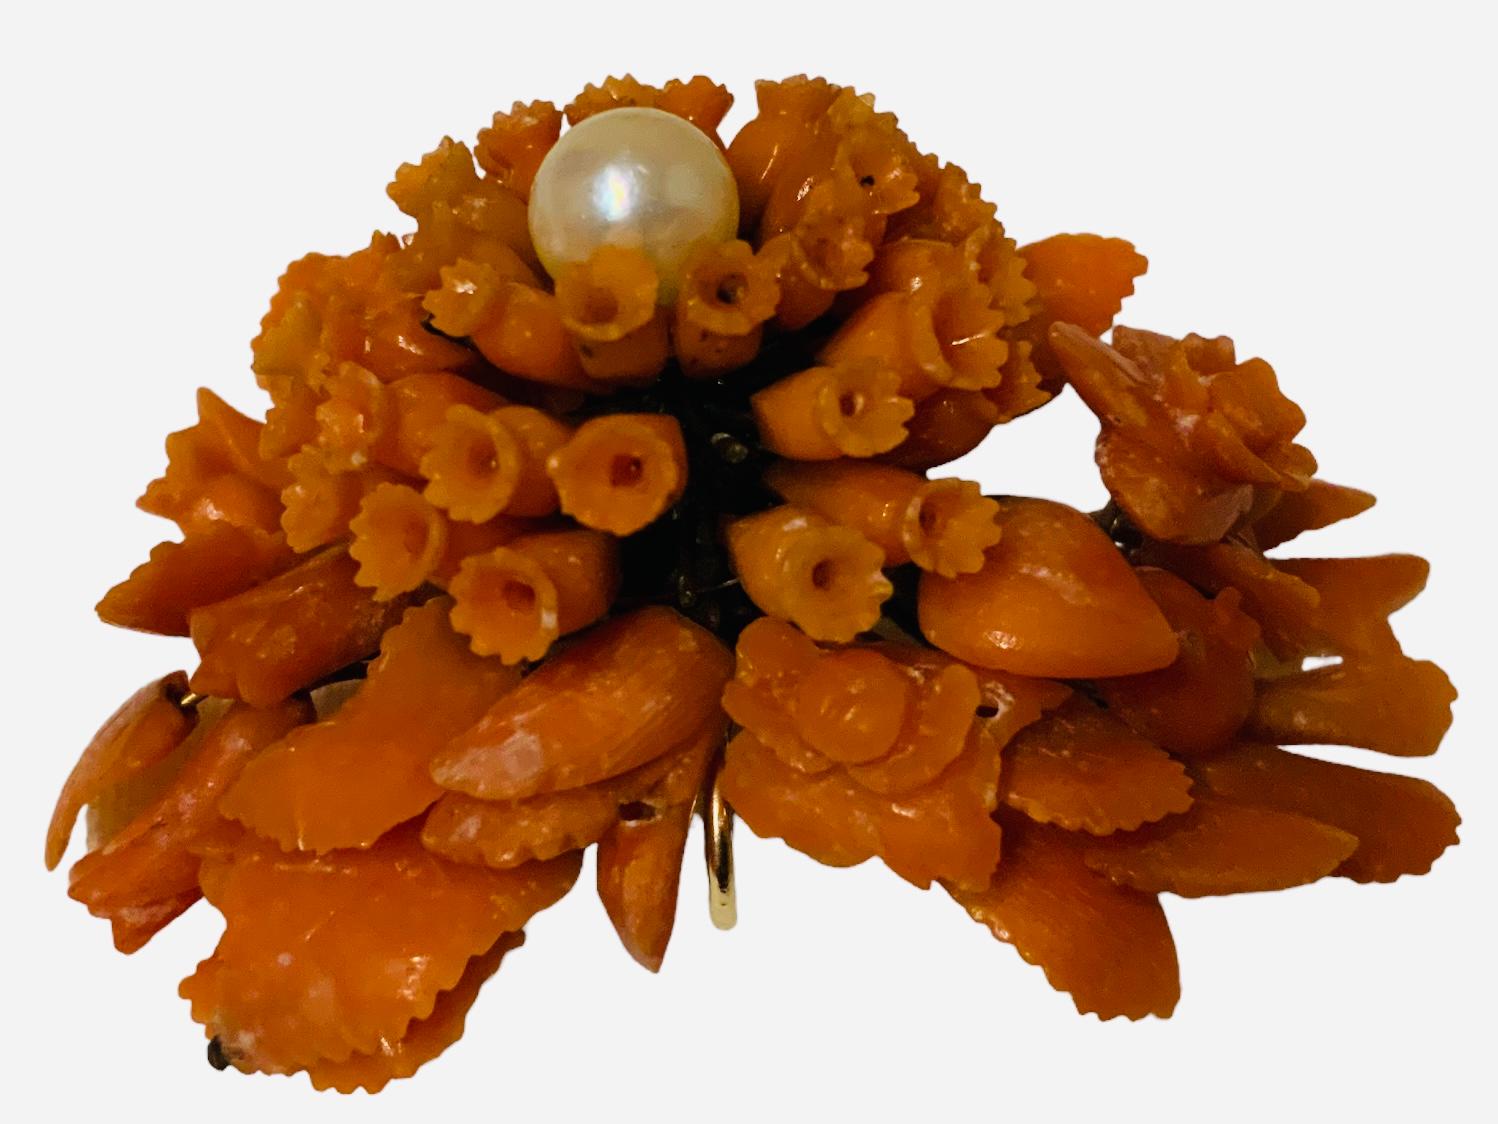 This is a 19th century Coral and Pearl Pendant. It depicts a bouquet of branches of flowers and leaves made of hand carved coral. The top center of the bouquet is enhanced by a culture pearl. The back of the pendant has two hooks to be used for a